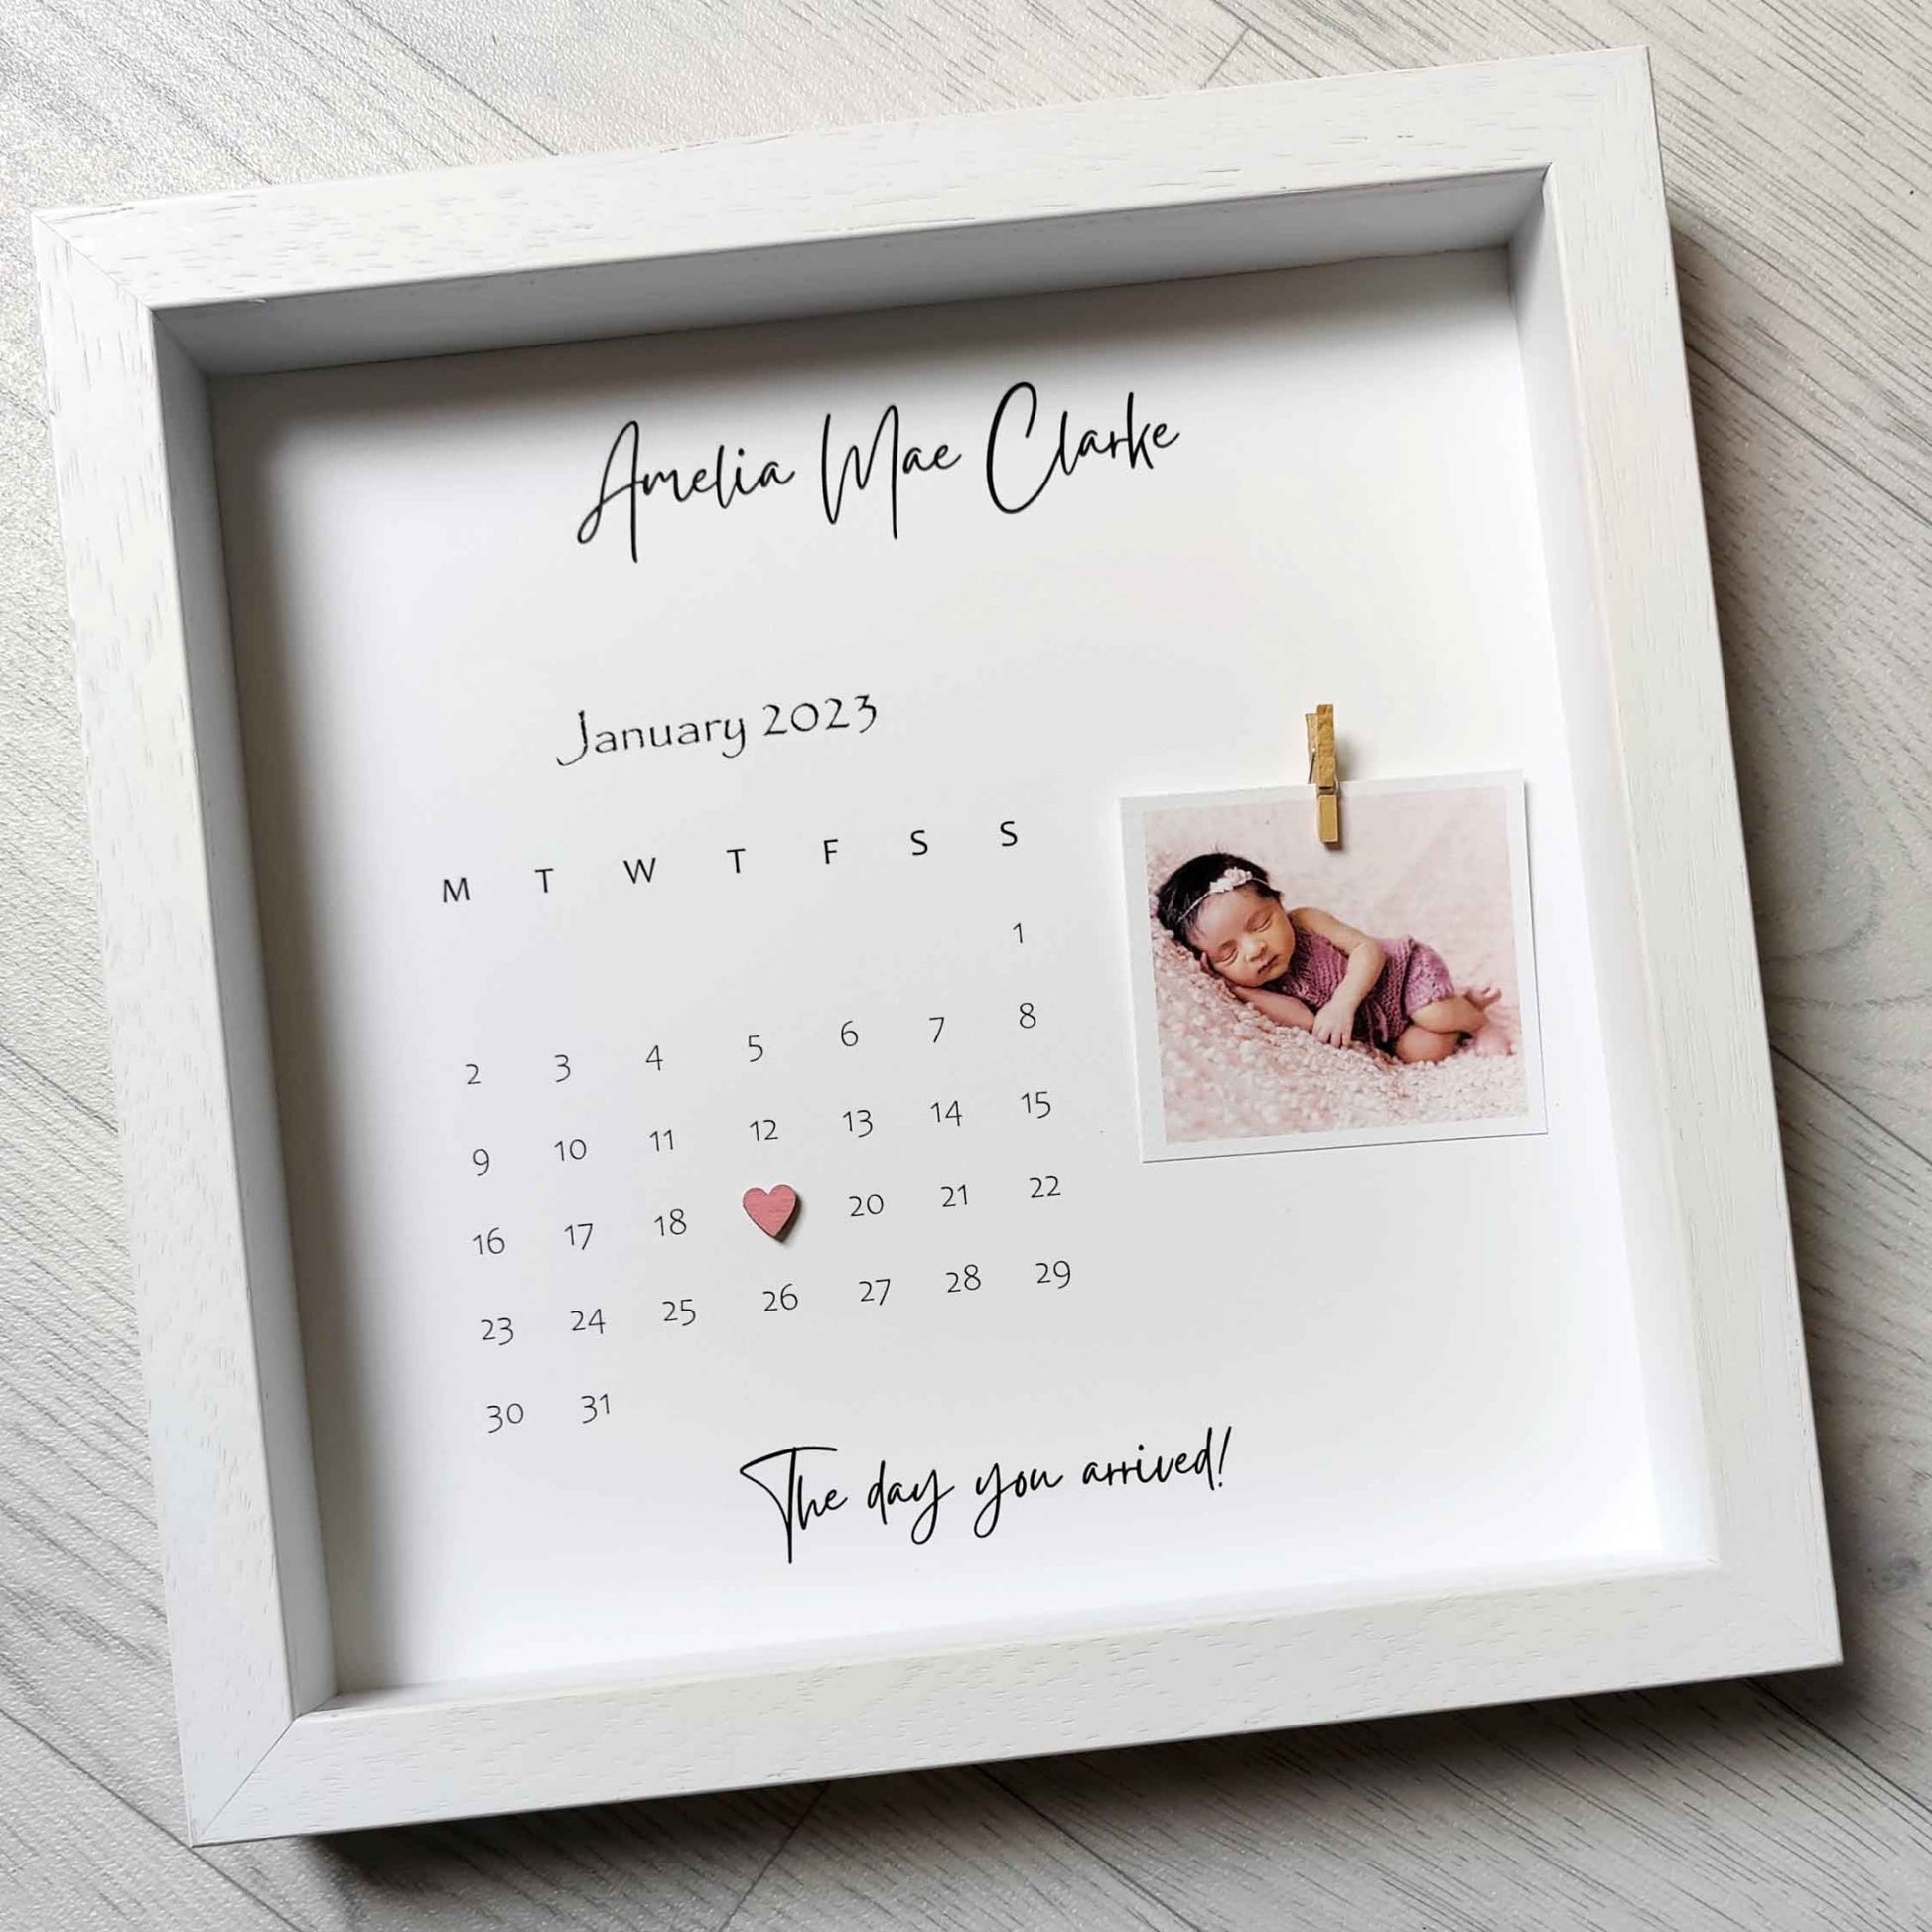 The Day You Arrived | Baby Gift - Cliste Designs｜Cliste Co